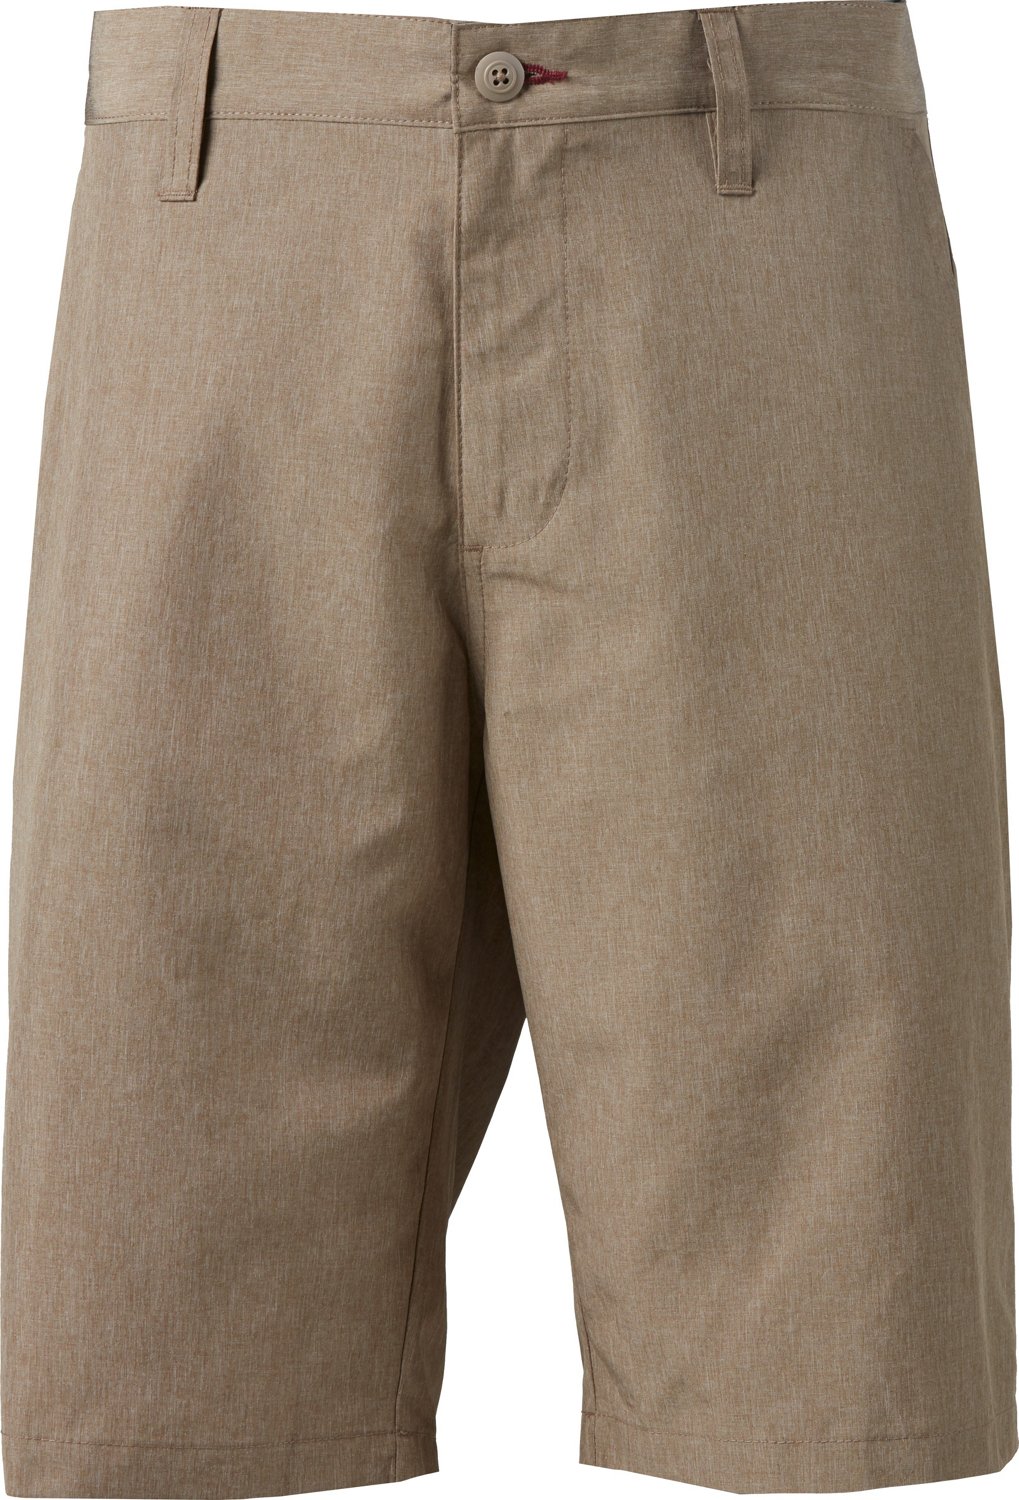 Magellan Outdoors Men's Father's Day Shorts 10 in | Academy